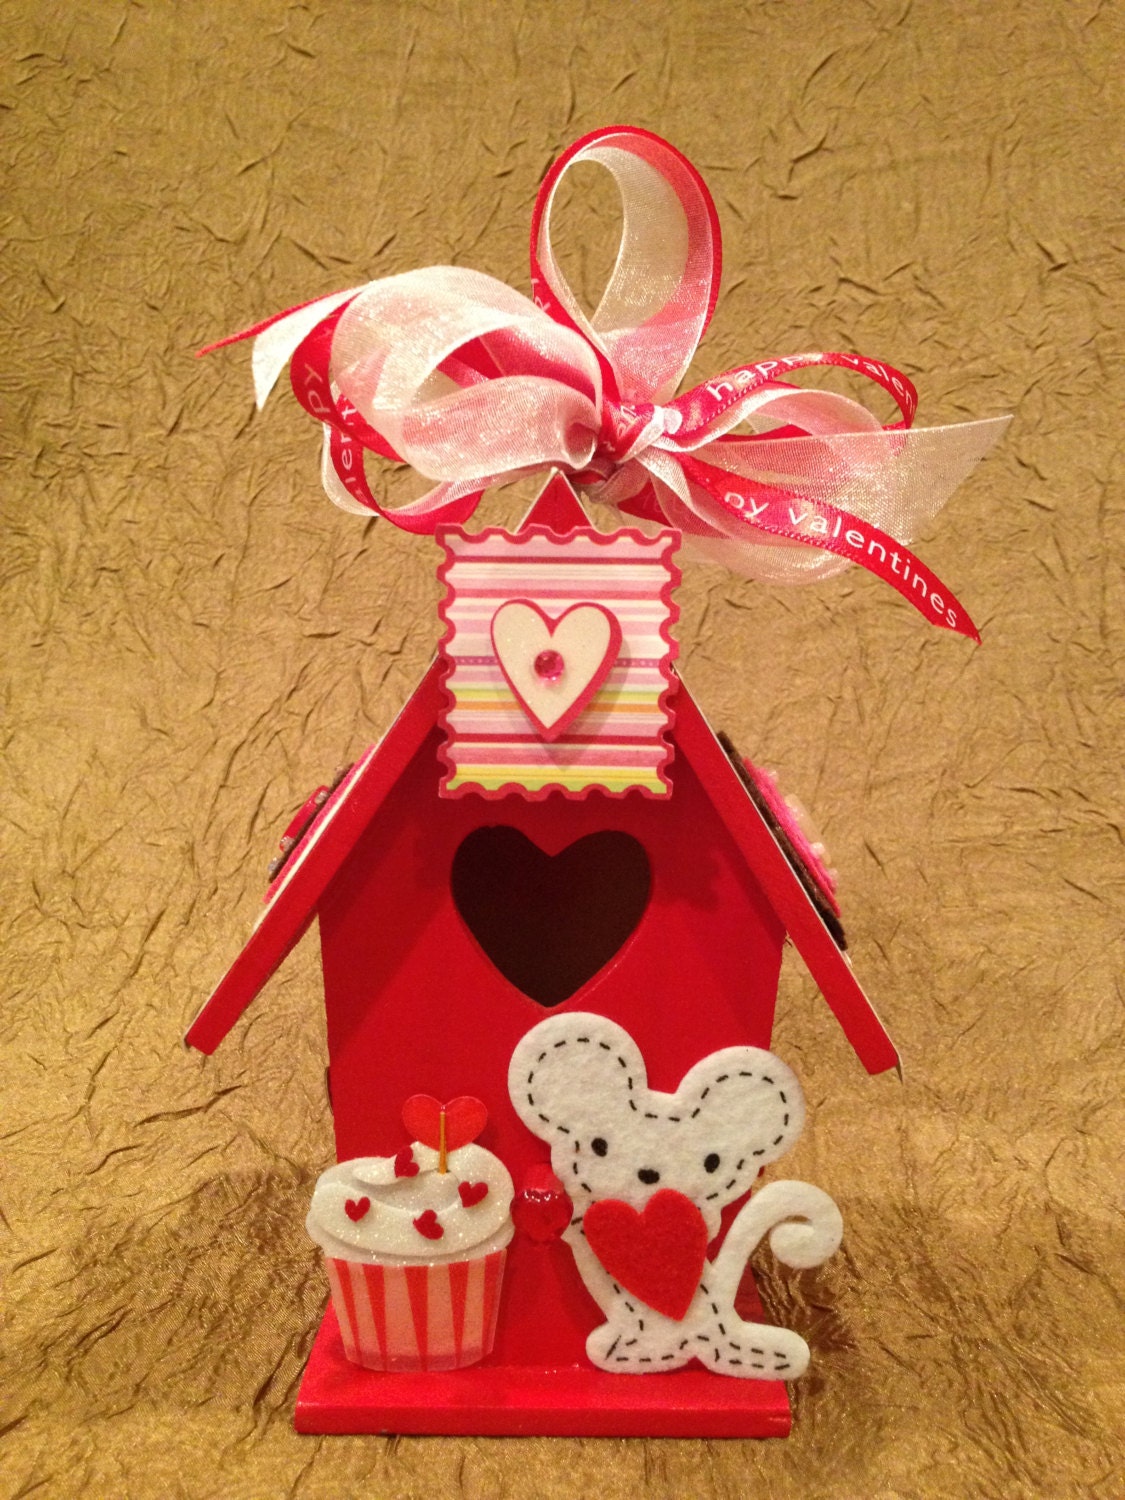 VALENTINE's, Anniversary, BiRTHDaY - MOUSE in the House - Handmade Wood Birdhouse Decoration w Hearts n Cupcakes - SWeeT Gift (BH238)